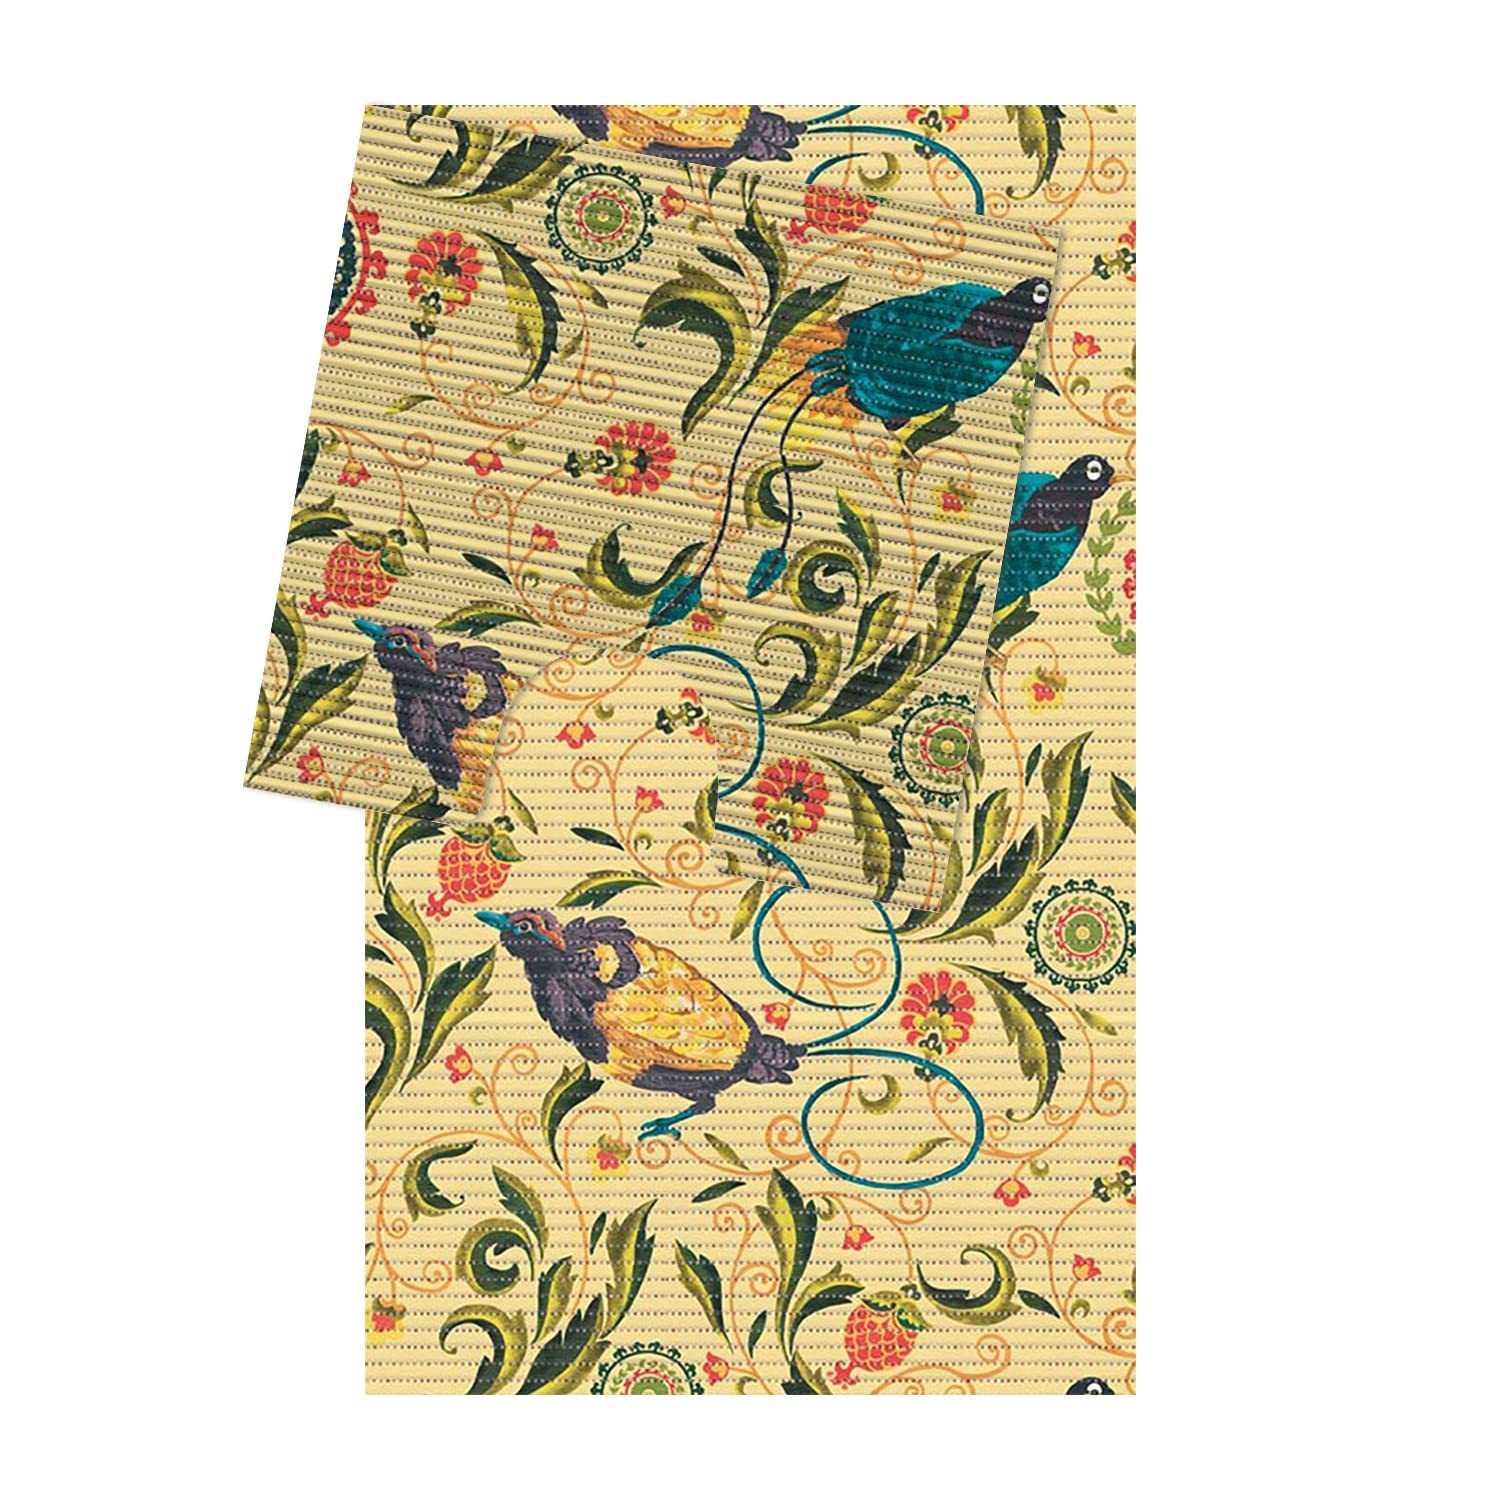 Primary image for Dundee Deco Birds Bathroom Mat Set (2 pcs) - 31" x 20" and 19.7" x 19.7" Waterpr